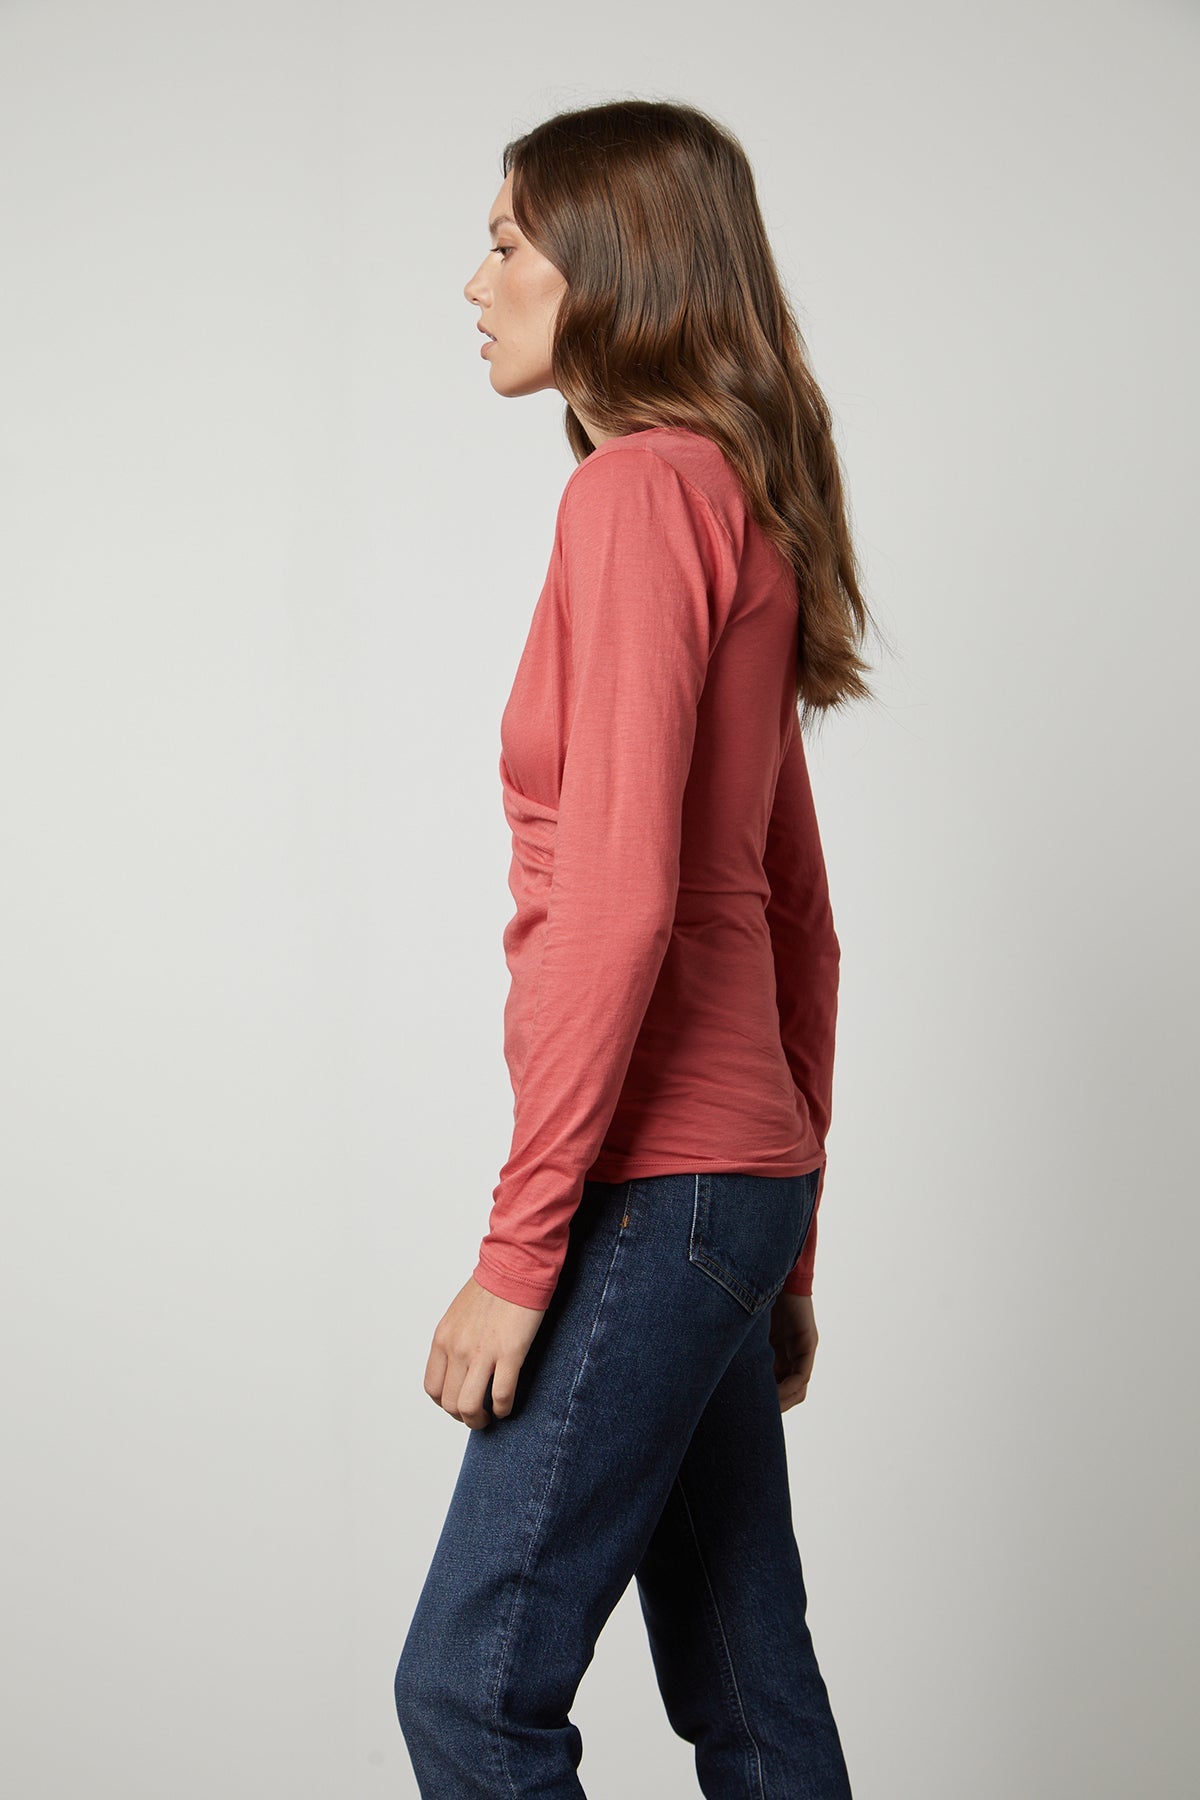 A woman wearing jeans and a long-sleeved MERI WRAP FRONT FITTED TOP by Velvet by Graham & Spencer.-35567564423361